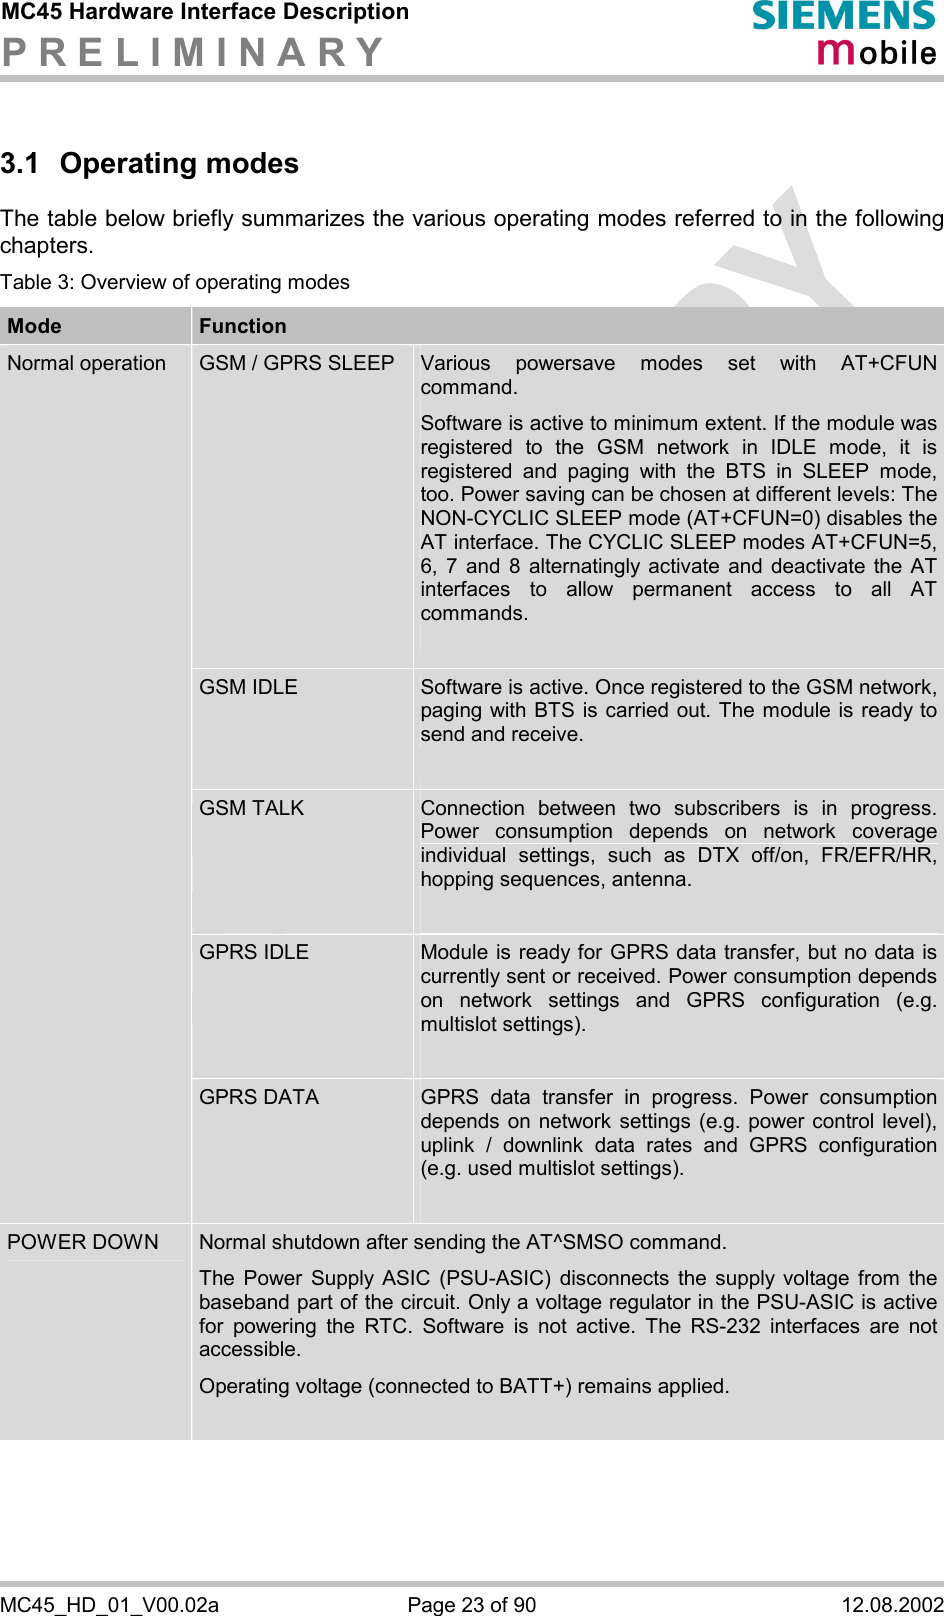 MC45 Hardware Interface Description P R E L I M I N A R Y      MC45_HD_01_V00.02a  Page 23 of 90  12.08.2002 3.1 Operating modes The table below briefly summarizes the various operating modes referred to in the following chapters.  Table 3: Overview of operating modes Mode  Function GSM / GPRS SLEEP  Various powersave modes set with AT+CFUN command.  Software is active to minimum extent. If the module was registered to the GSM network in IDLE mode, it is registered and paging with the BTS in SLEEP mode, too. Power saving can be chosen at different levels: The NON-CYCLIC SLEEP mode (AT+CFUN=0) disables the AT interface. The CYCLIC SLEEP modes AT+CFUN=5, 6, 7 and 8 alternatingly activate and deactivate the AT interfaces to allow permanent access to all AT commands.  GSM IDLE  Software is active. Once registered to the GSM network, paging with BTS is carried out. The module is ready to send and receive.  GSM TALK  Connection between two subscribers is in progress. Power consumption depends on network coverage individual settings, such as DTX off/on, FR/EFR/HR, hopping sequences, antenna.  GPRS IDLE  Module is ready for GPRS data transfer, but no data is currently sent or received. Power consumption depends on network settings and GPRS configuration (e.g. multislot settings).  Normal operation GPRS DATA  GPRS data transfer in progress. Power consumption depends on network settings (e.g. power control level), uplink / downlink data rates and GPRS configuration (e.g. used multislot settings).  POWER DOWN  Normal shutdown after sending the AT^SMSO command.  The Power Supply ASIC (PSU-ASIC) disconnects the supply voltage from the baseband part of the circuit. Only a voltage regulator in the PSU-ASIC is active for powering the RTC. Software is not active. The RS-232 interfaces are not accessible.  Operating voltage (connected to BATT+) remains applied.  